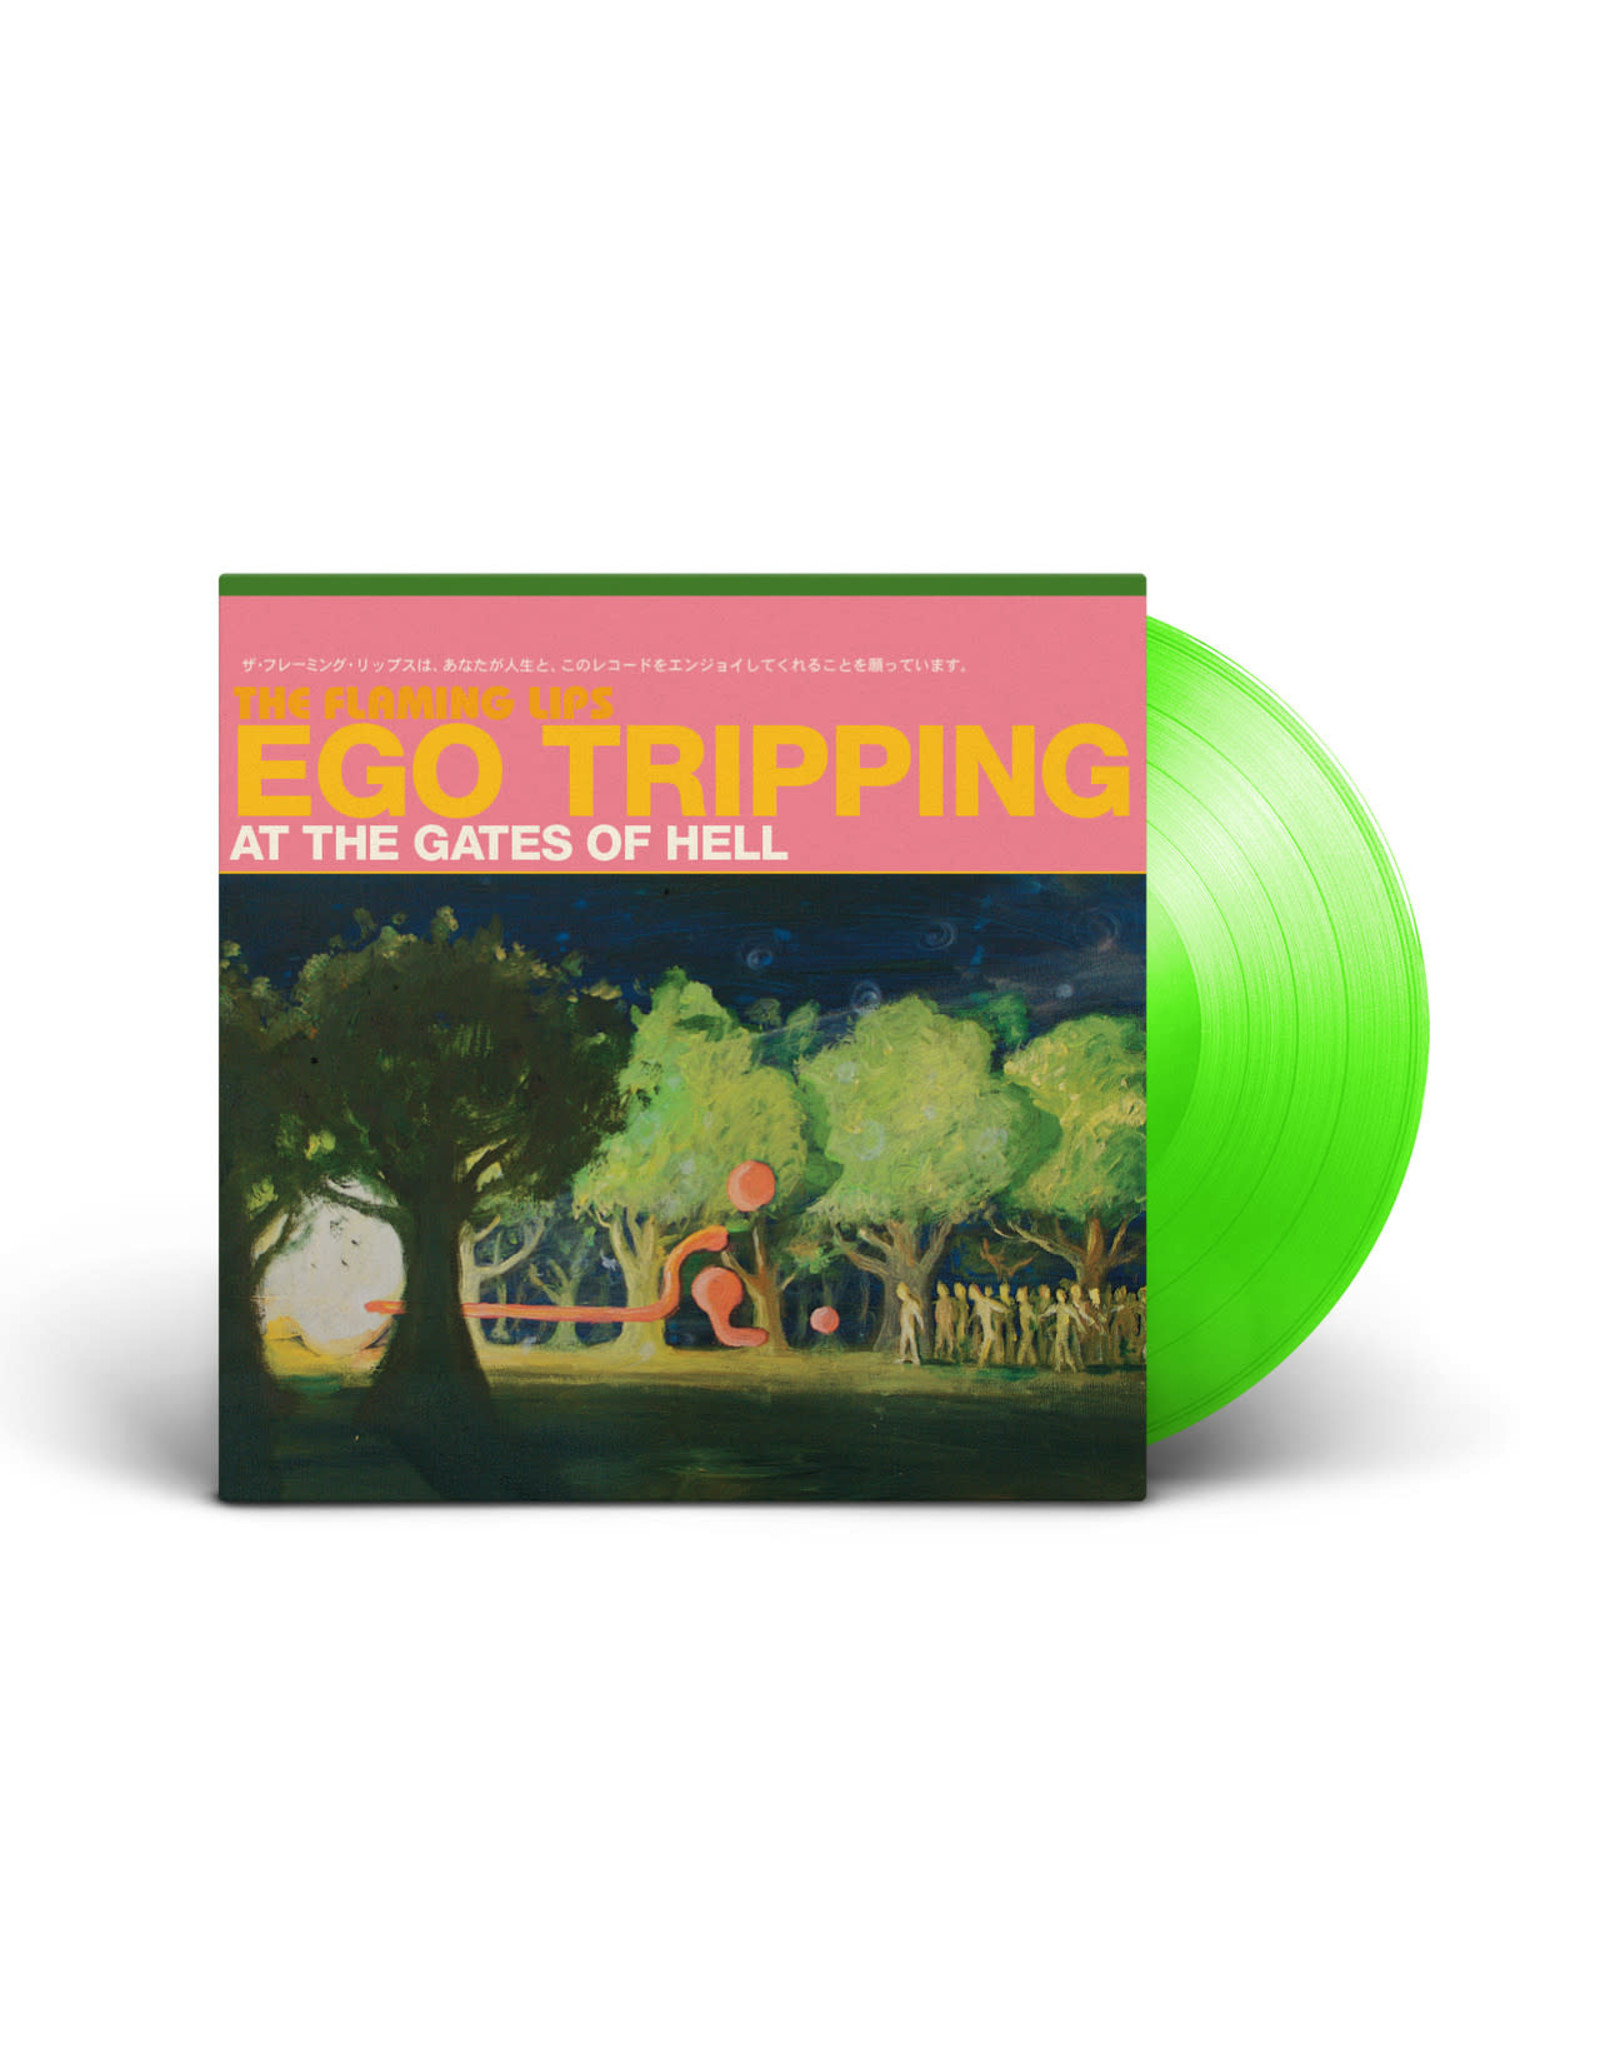 Warner Flaming Lips: Ego Tripping at the Gates of Hell LP